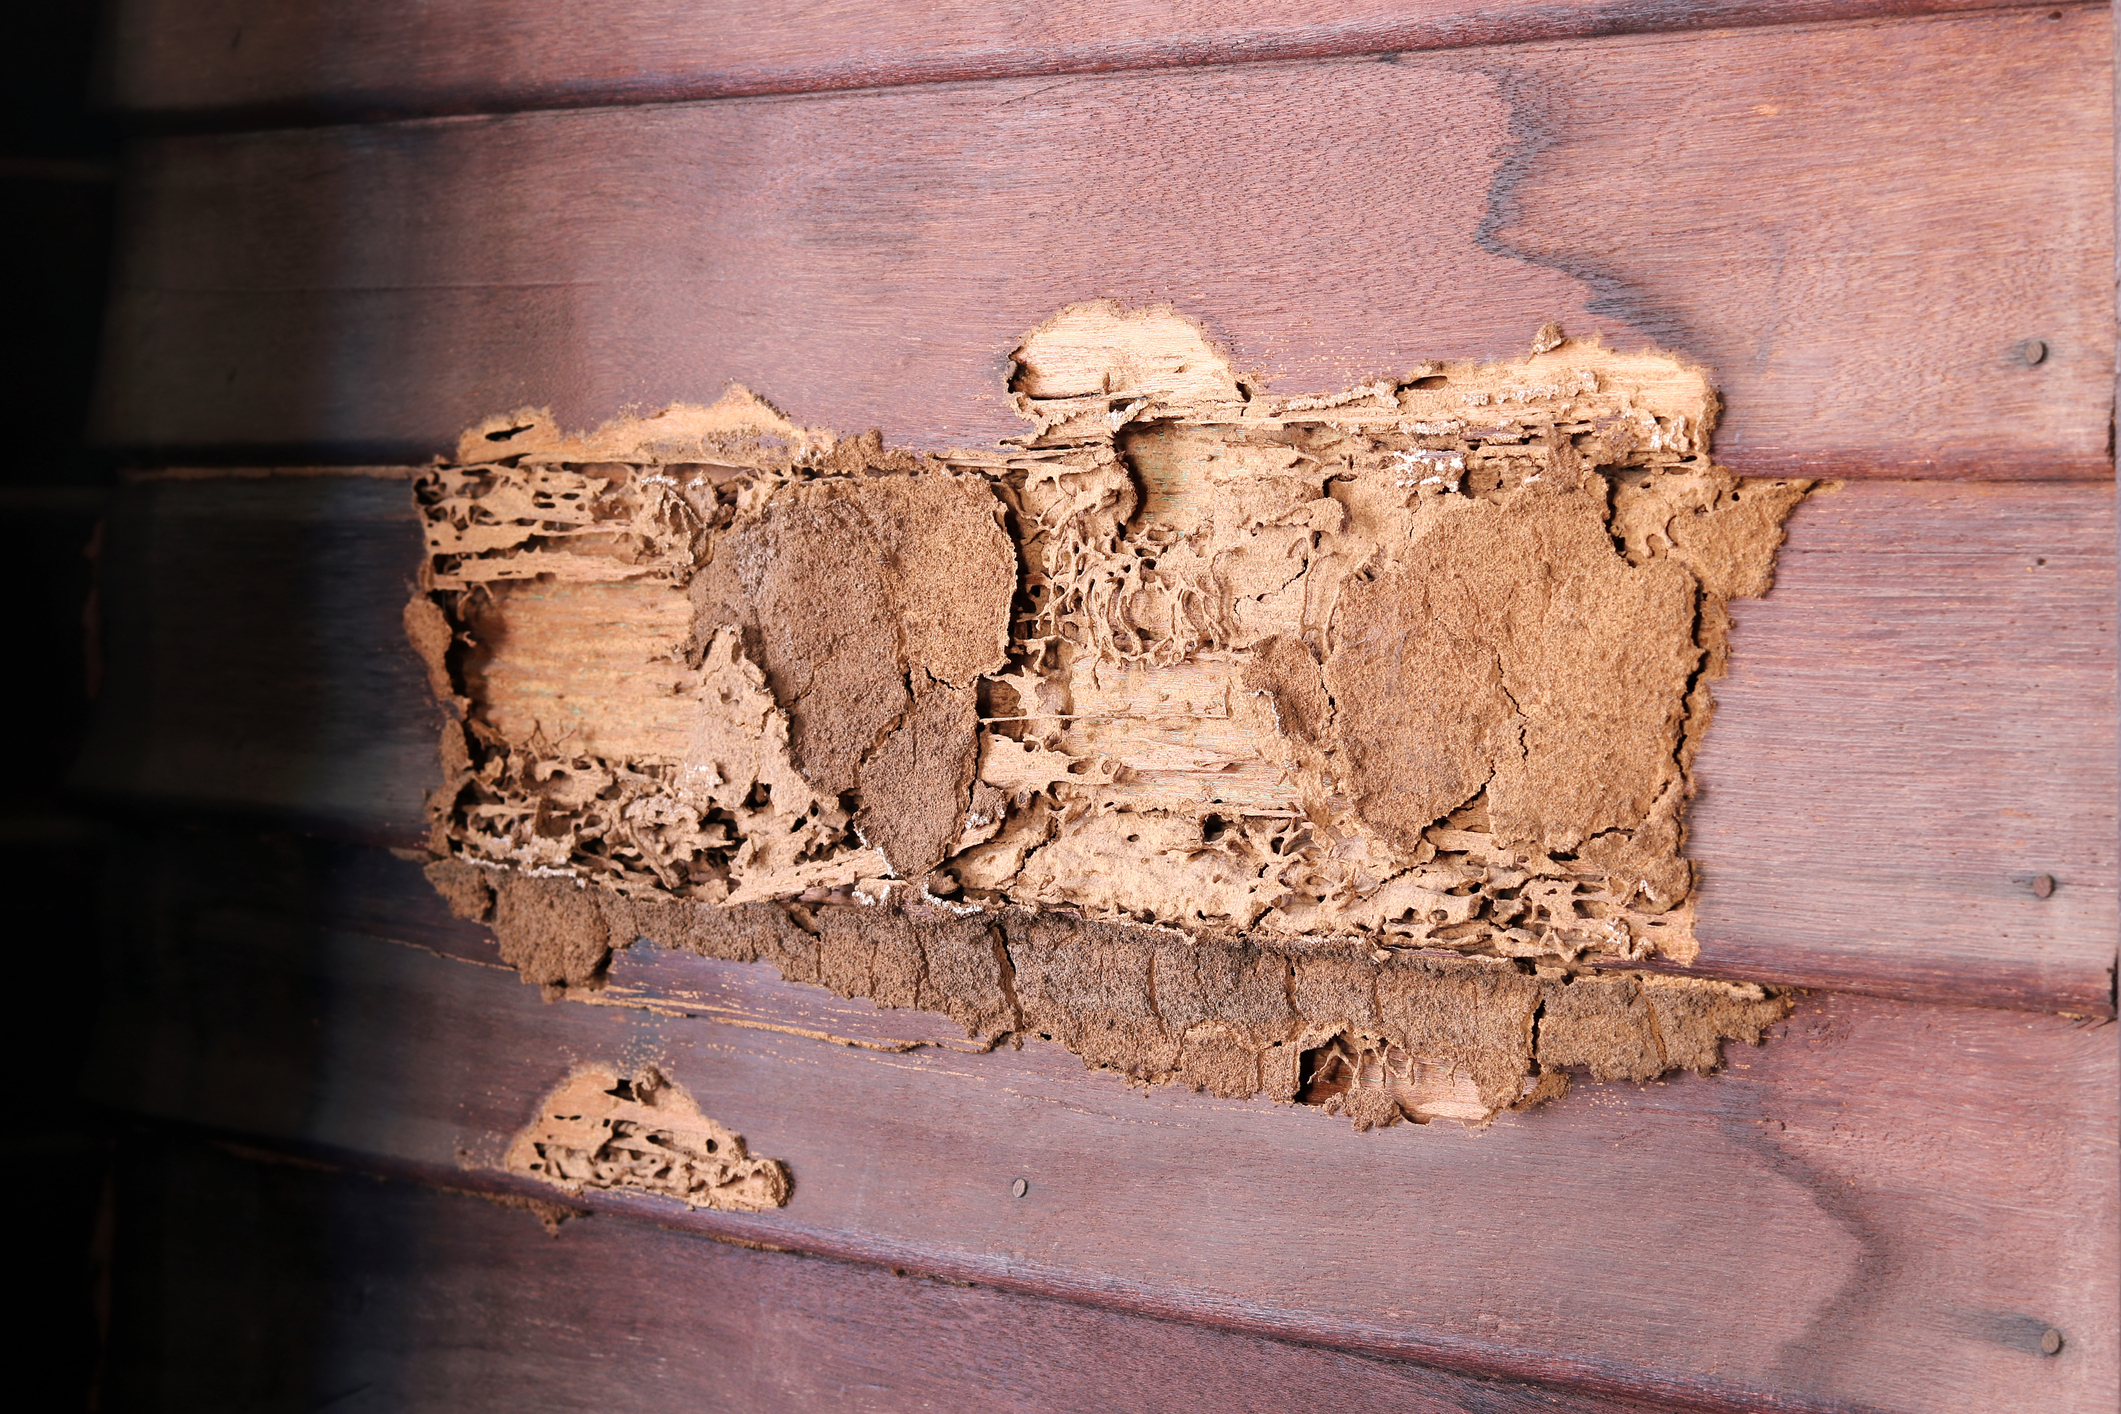 An exterior wall that has been eaten away by termites.